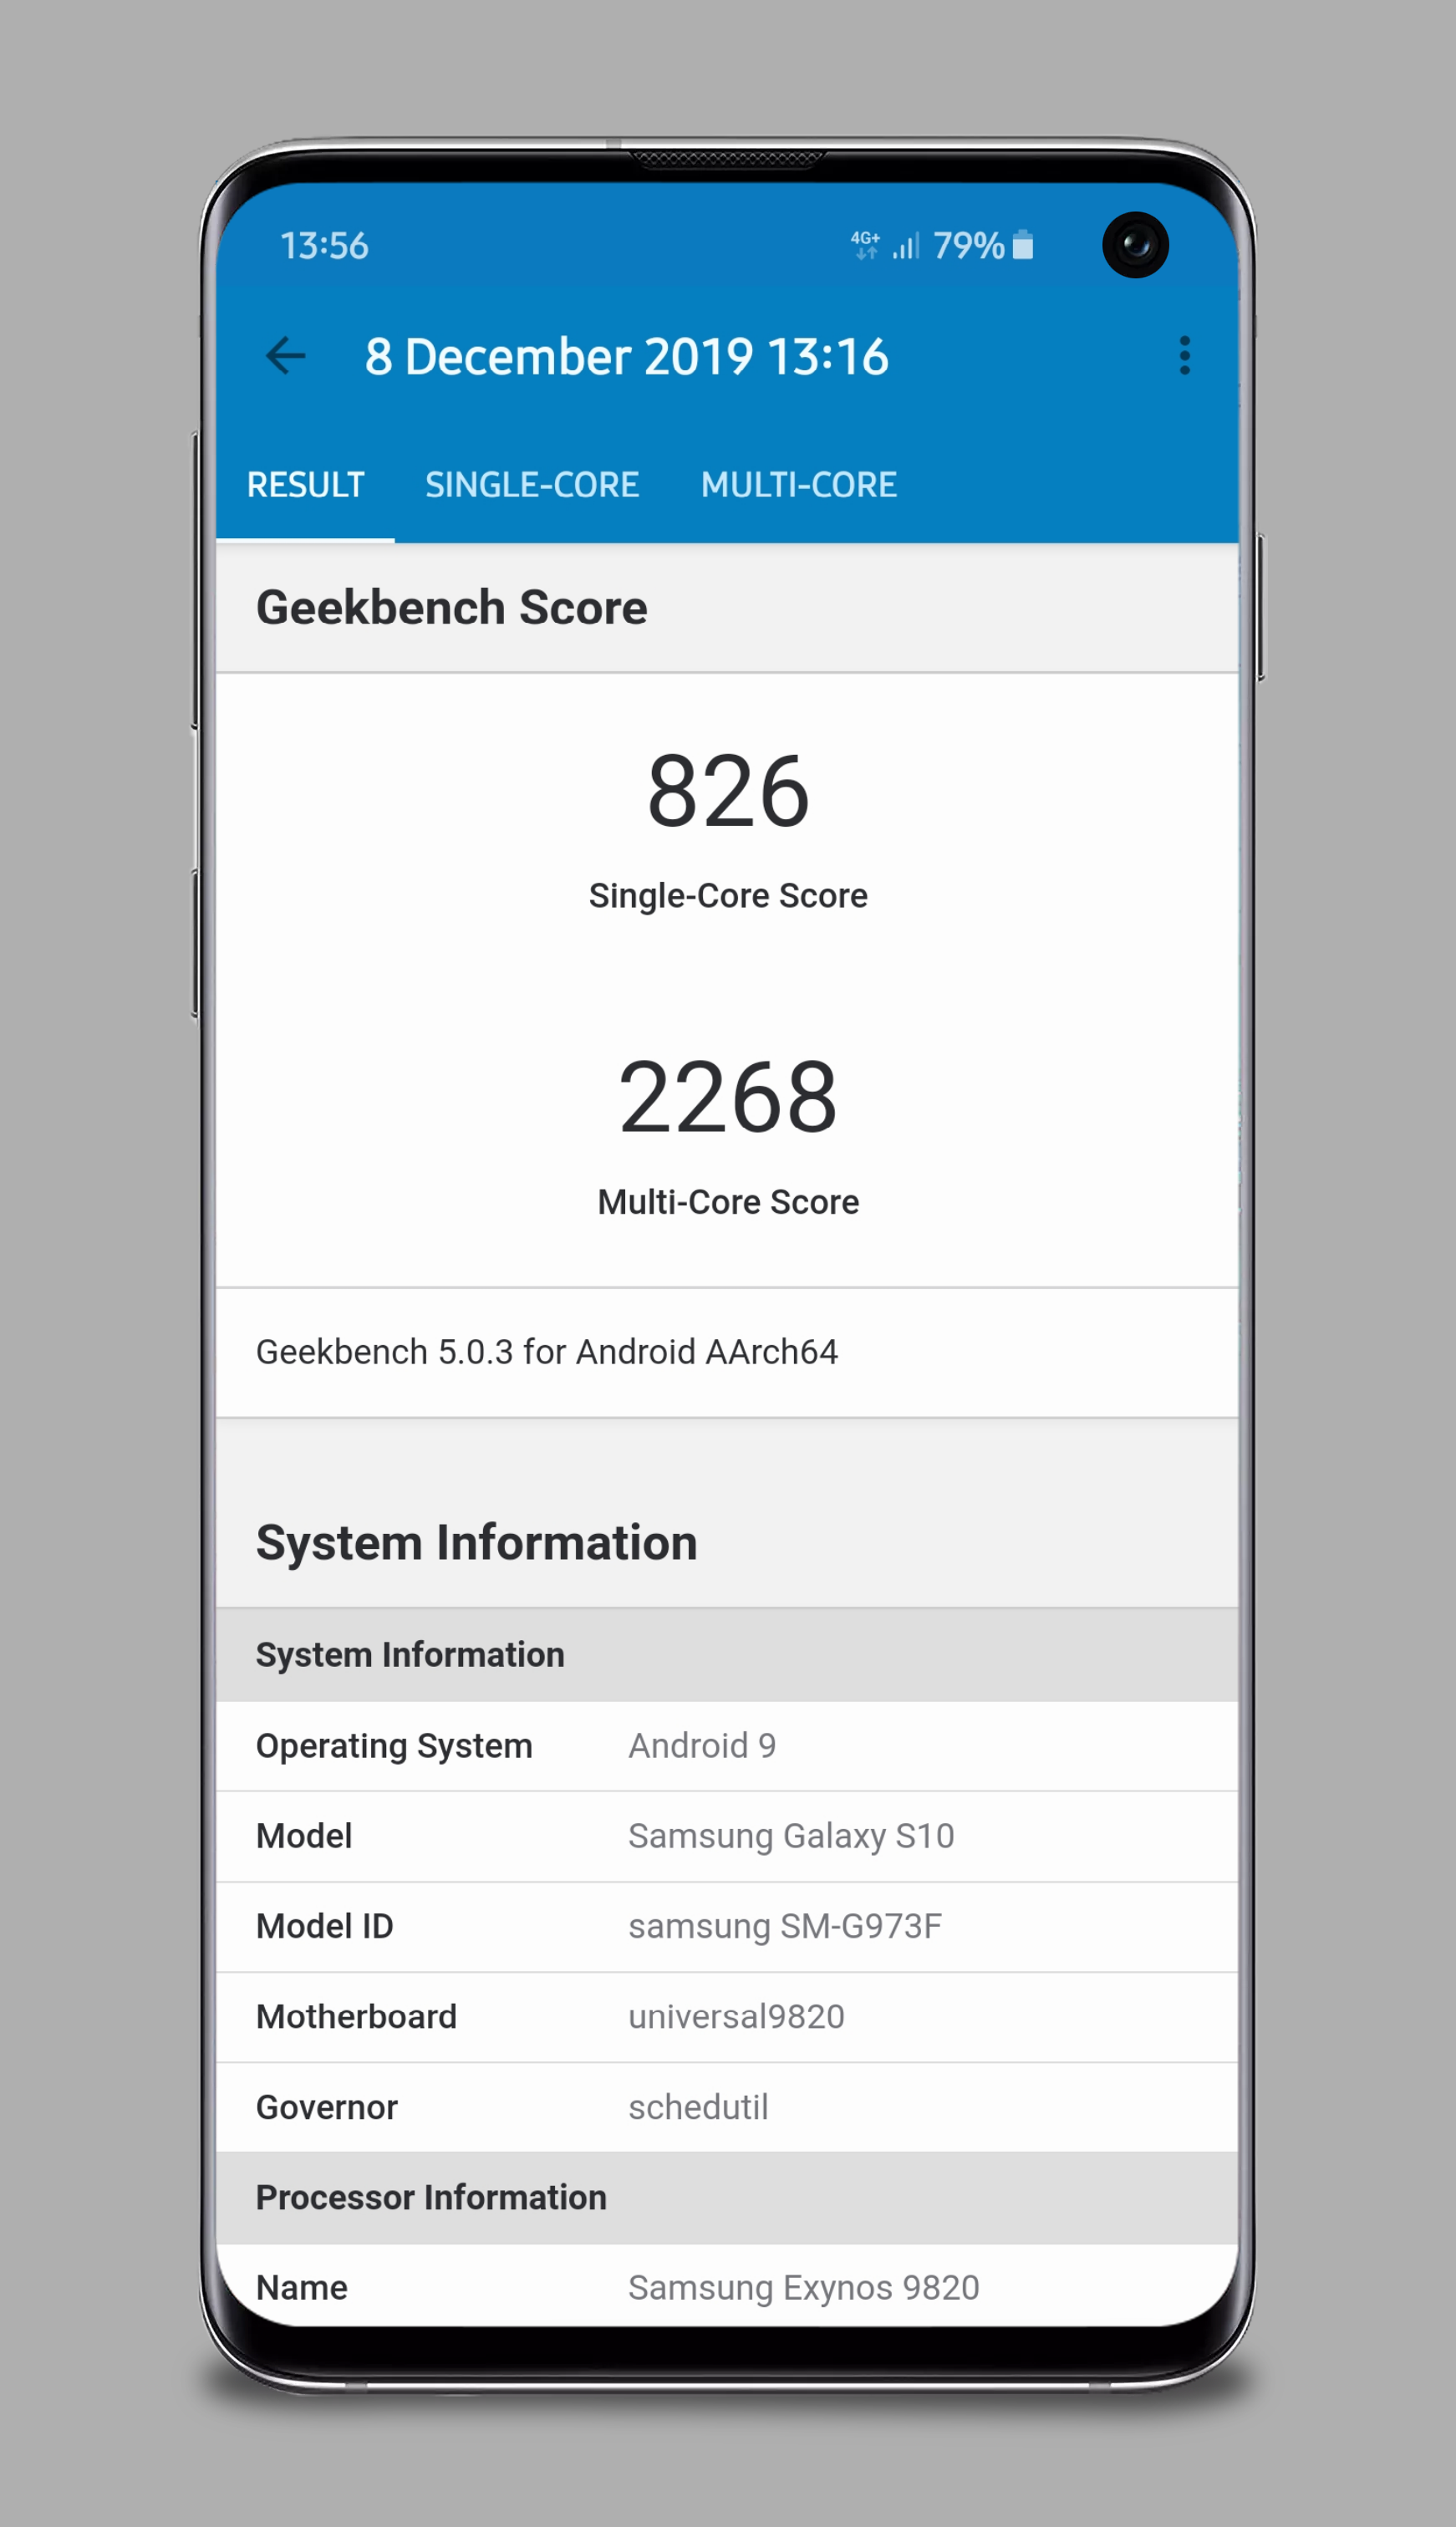 Geekbench 5] Pushed my phone over the limit! - Samsung Members